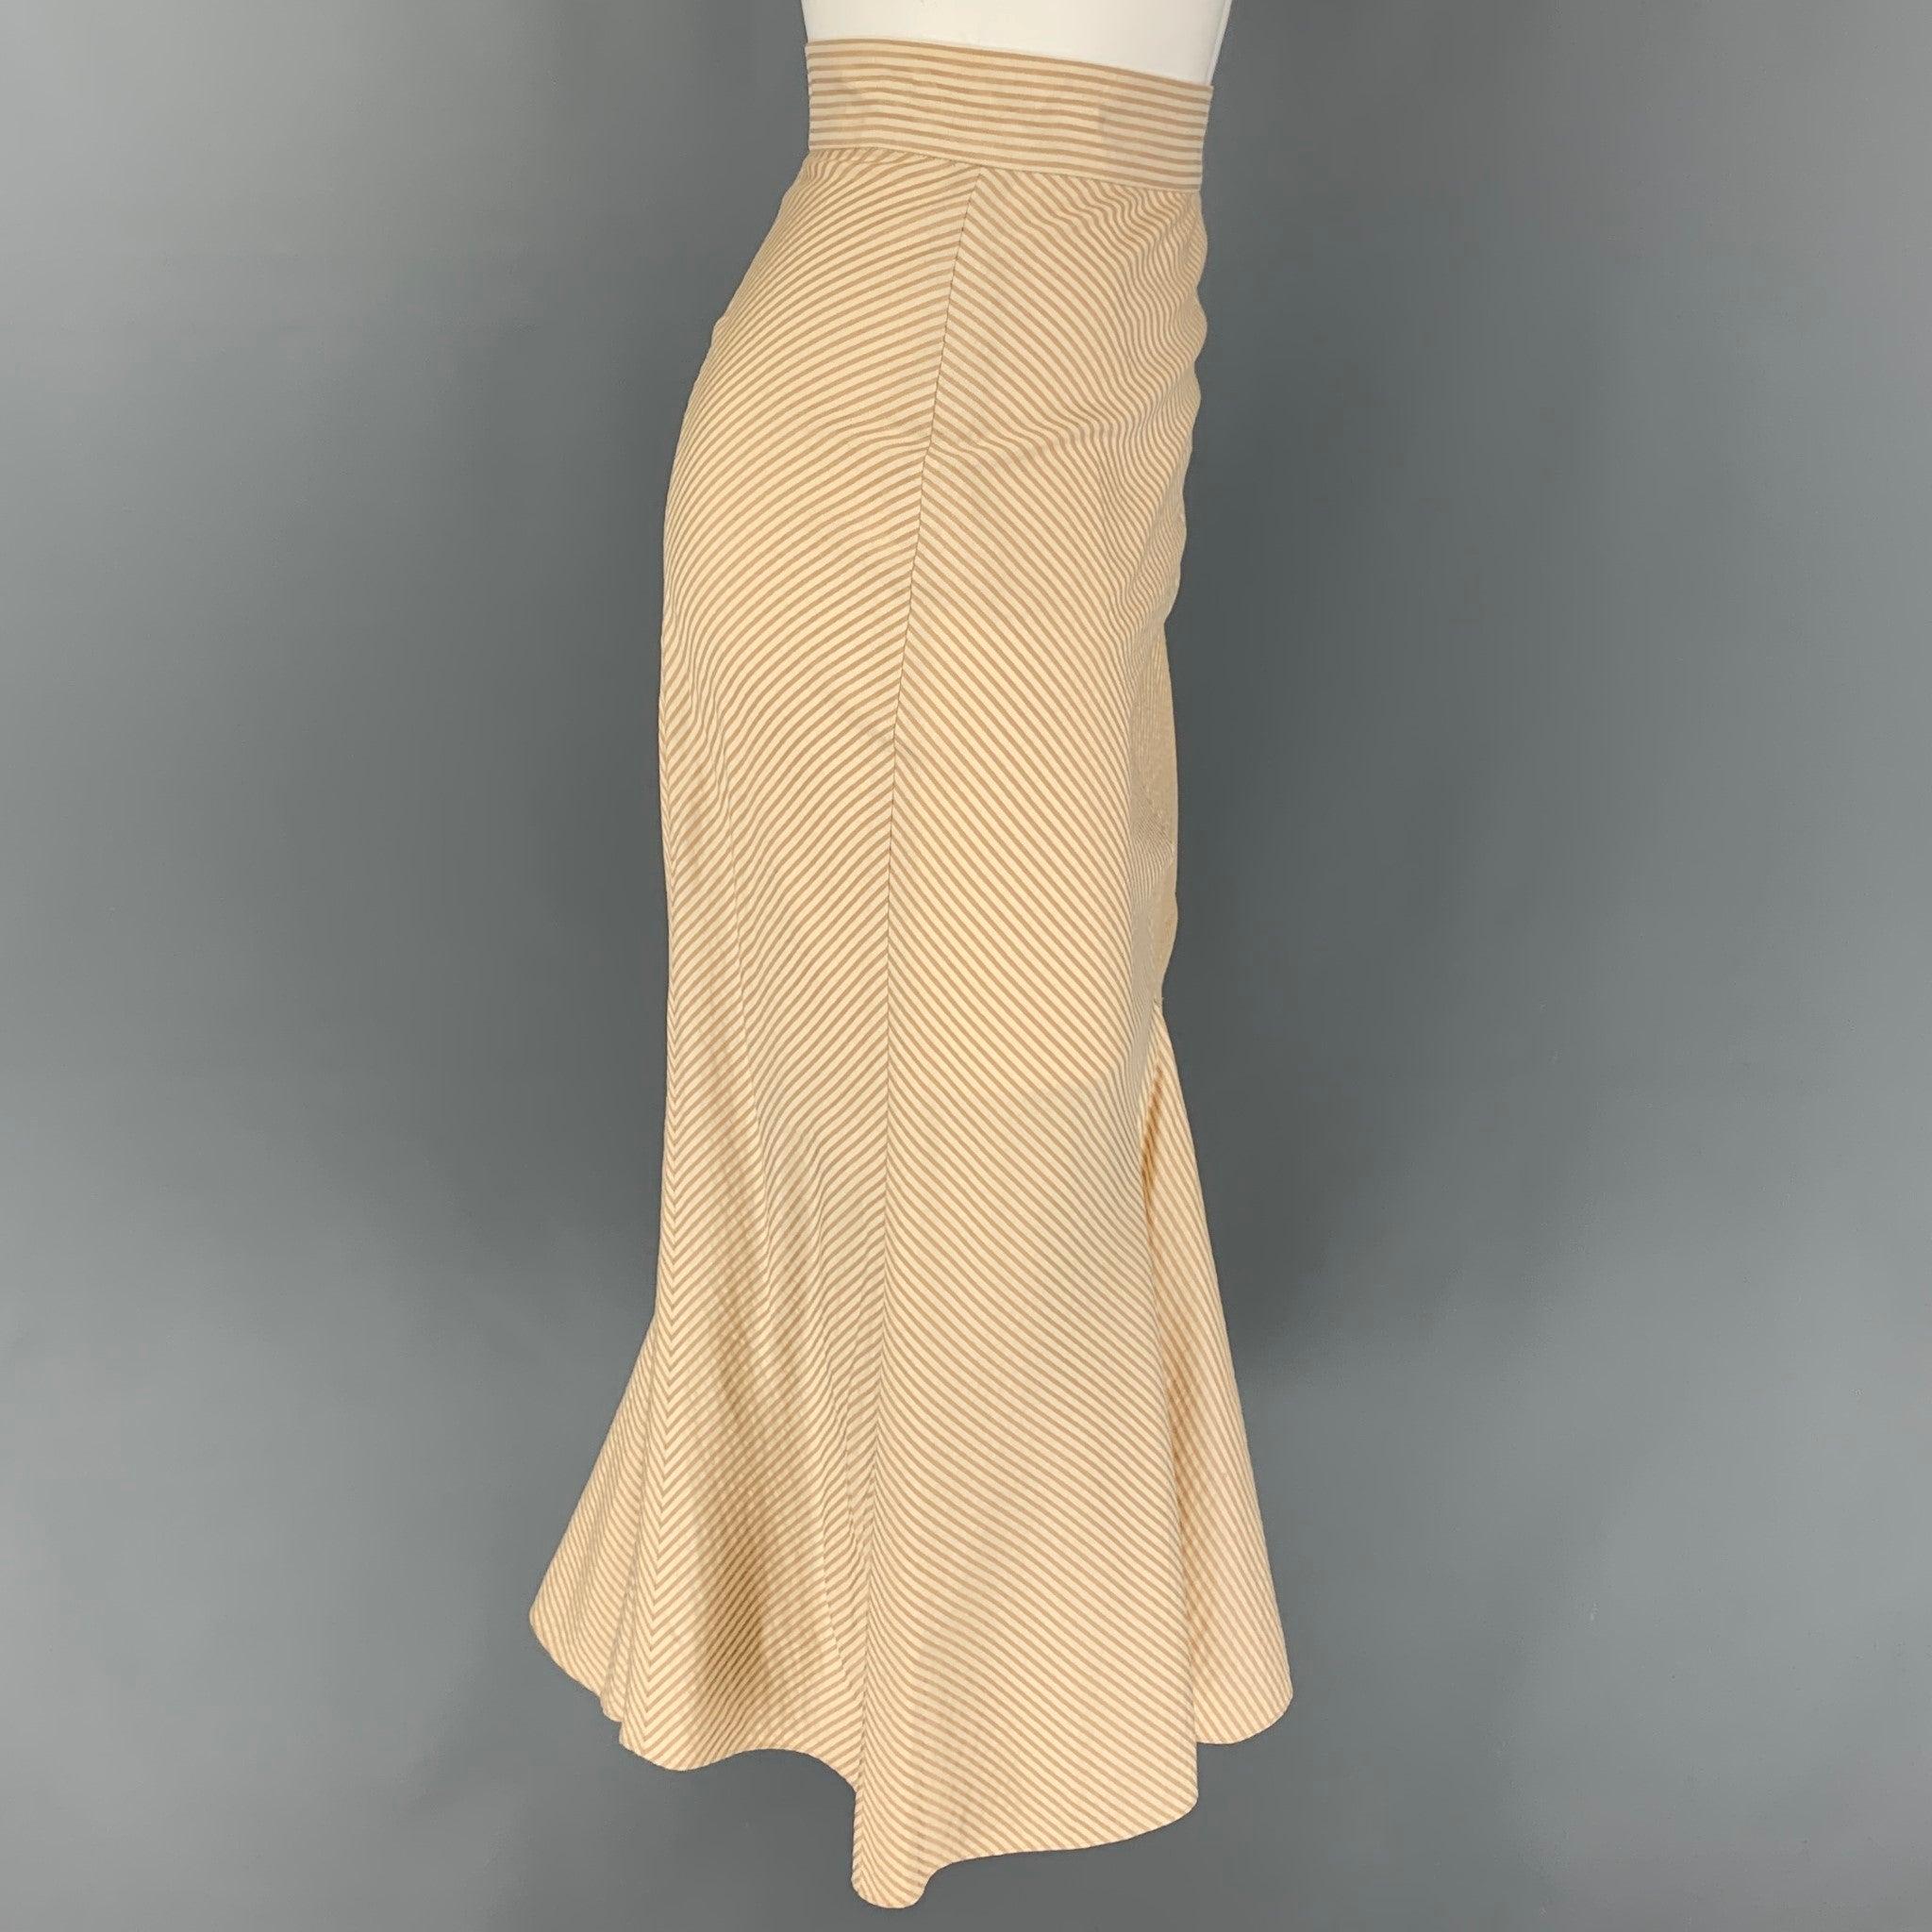 ZAC POSEN skirt comes in a beige & cream stripe silk featuring a mid-calf length, pleated hem, back butotn detail, and a side button & zipper closure.
Very Good
Pre-Owned Condition. 

Marked:   6 

Measurements: 
  Waist: 26 inches  Hip: 36 inches 